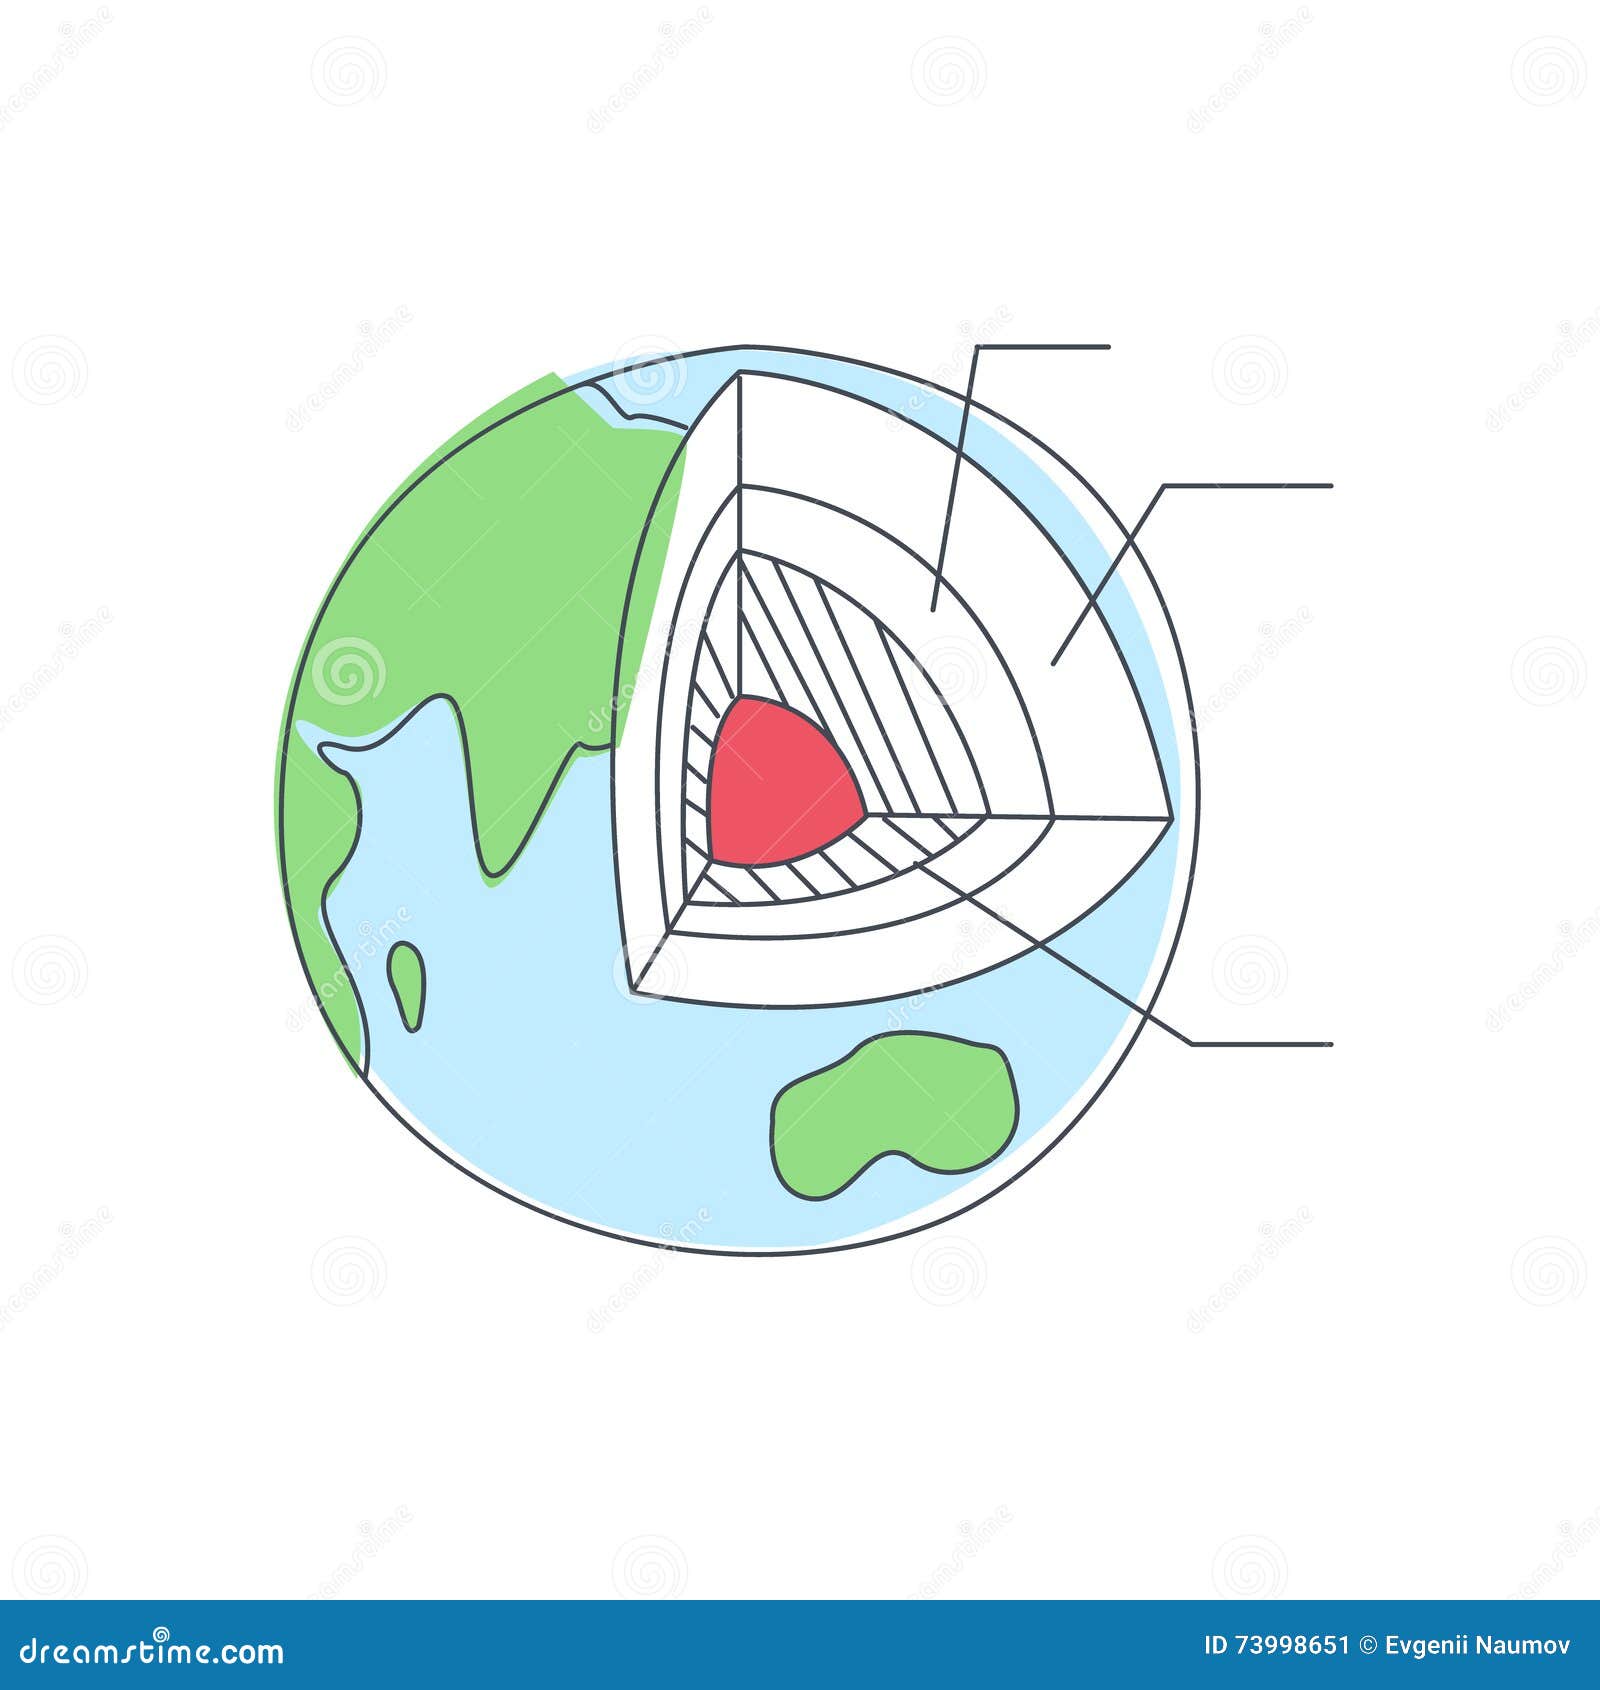 draw and label the three layers of the earth 2​ - Brainly.in